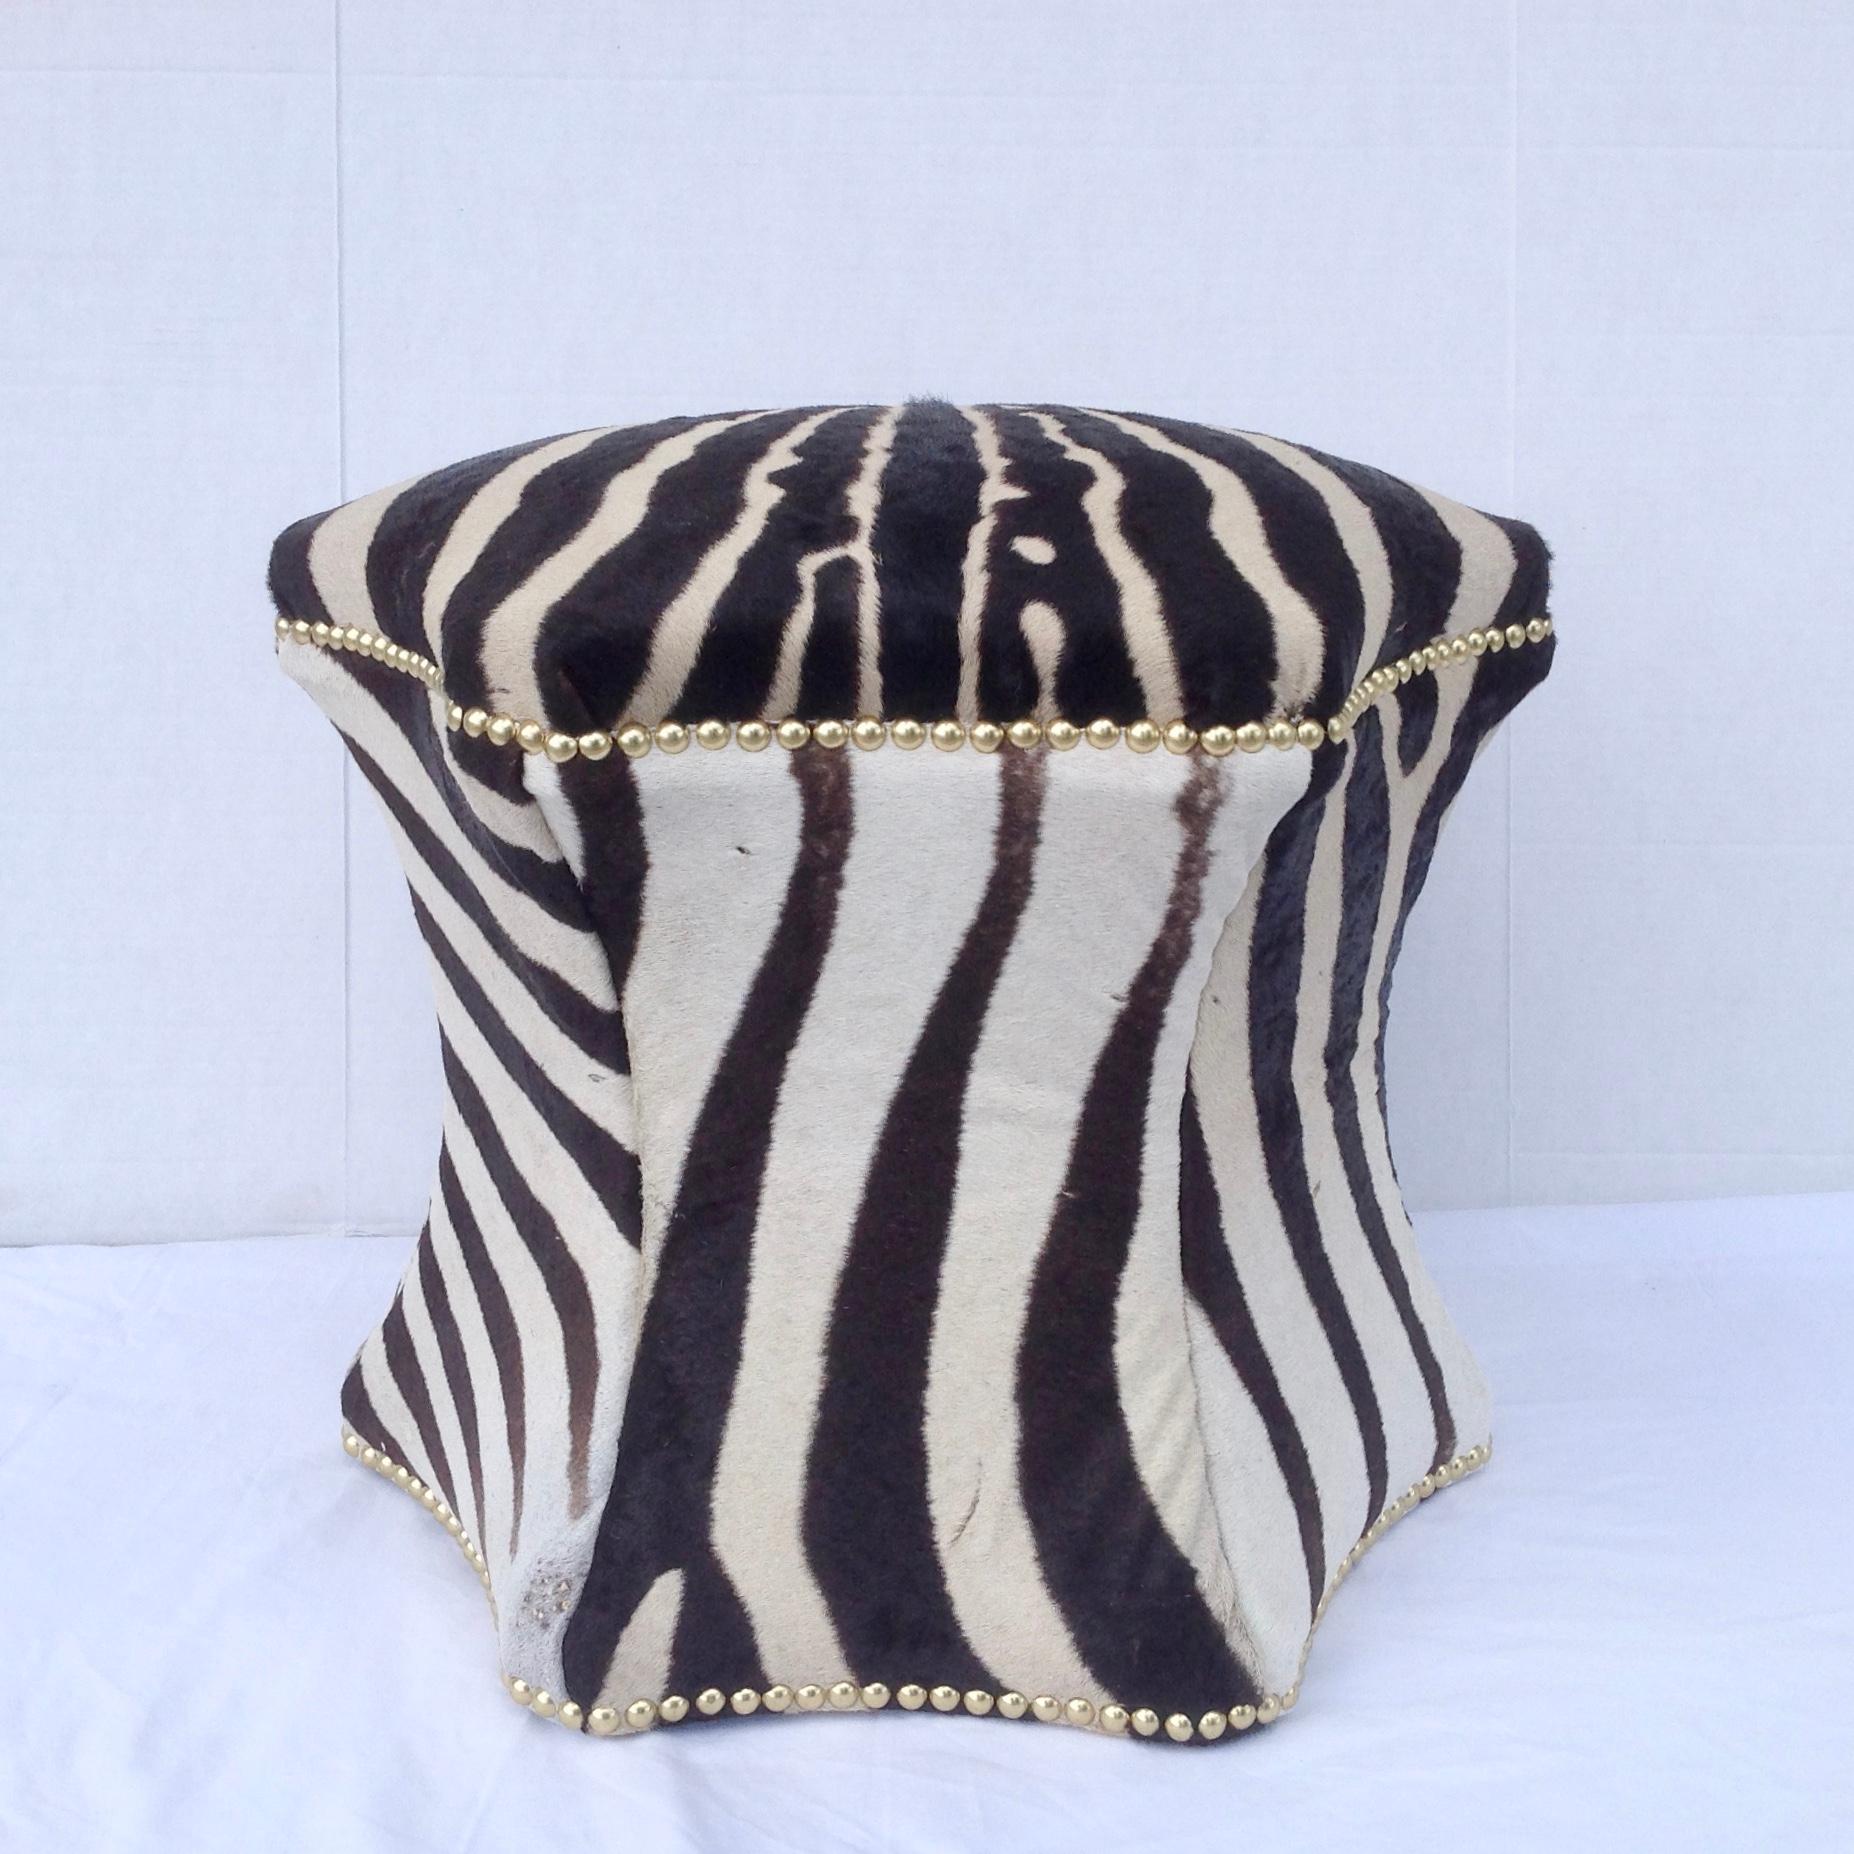 Beautifully fashioned from an entire zebra hide and appointed with brass nail head trim.
A custom made piece of unusual form.